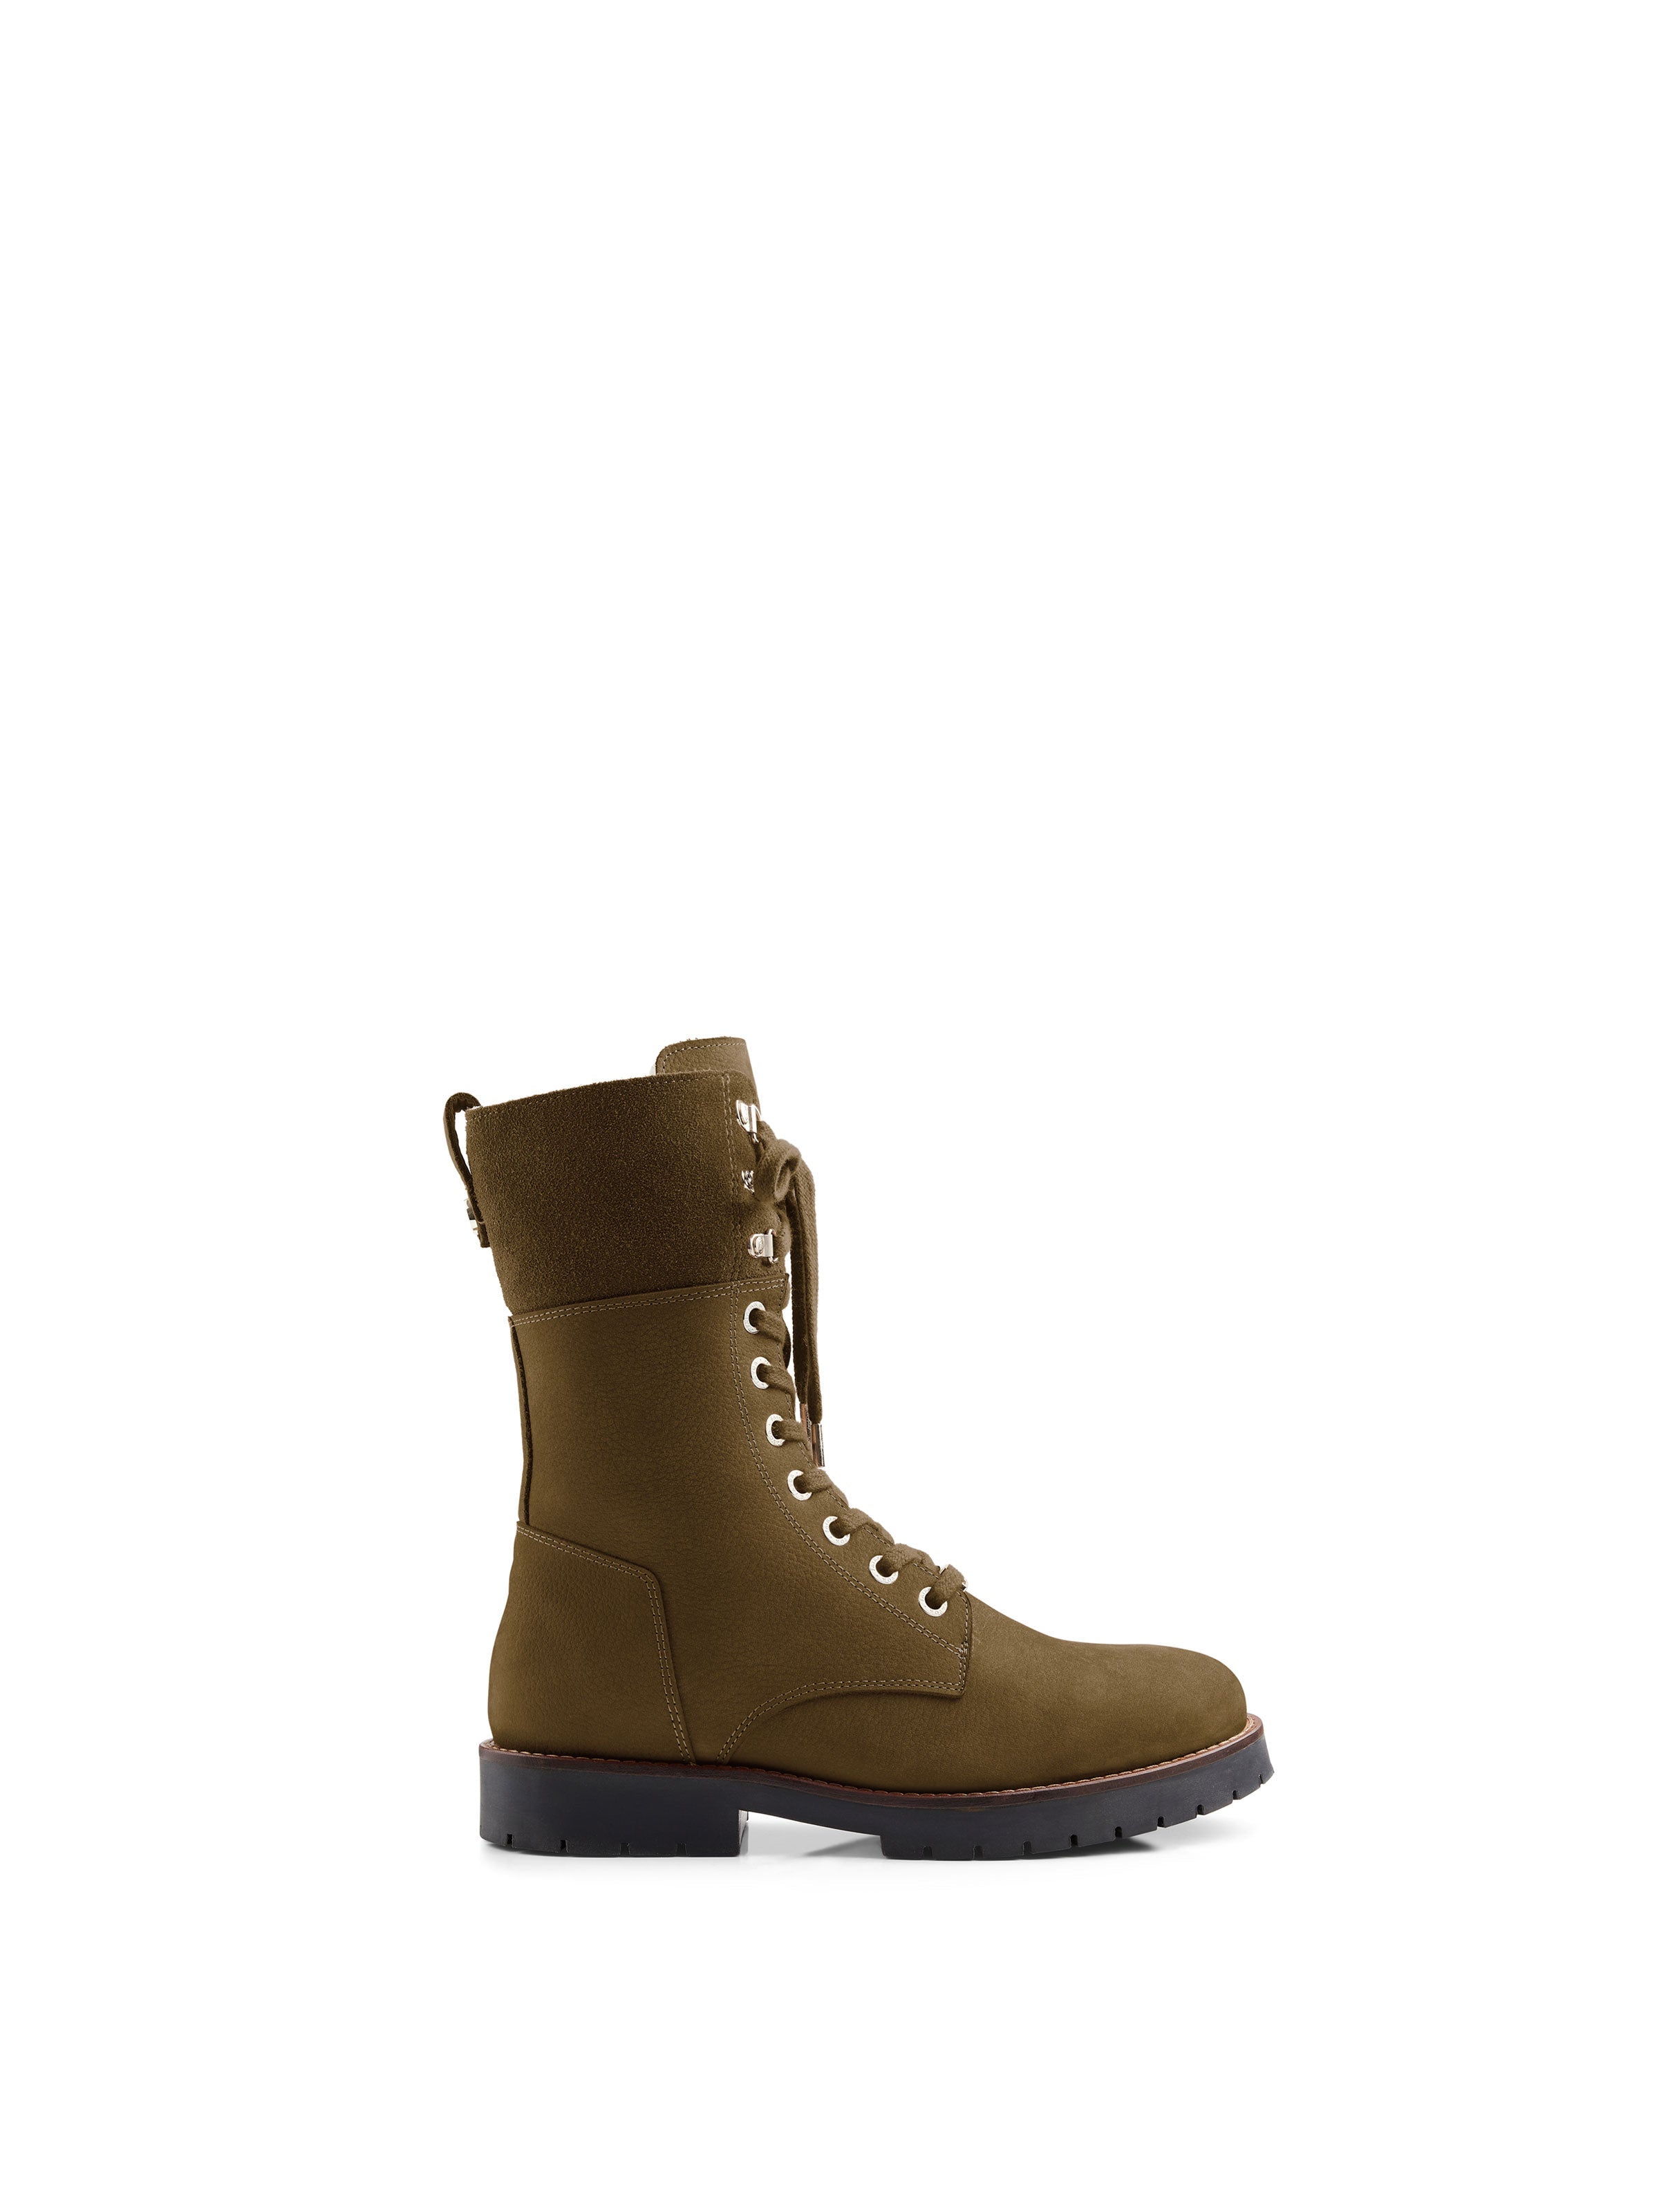 The Anglesey - Women's Combat Boot - Olive Nubuck | Fairfax & Favor